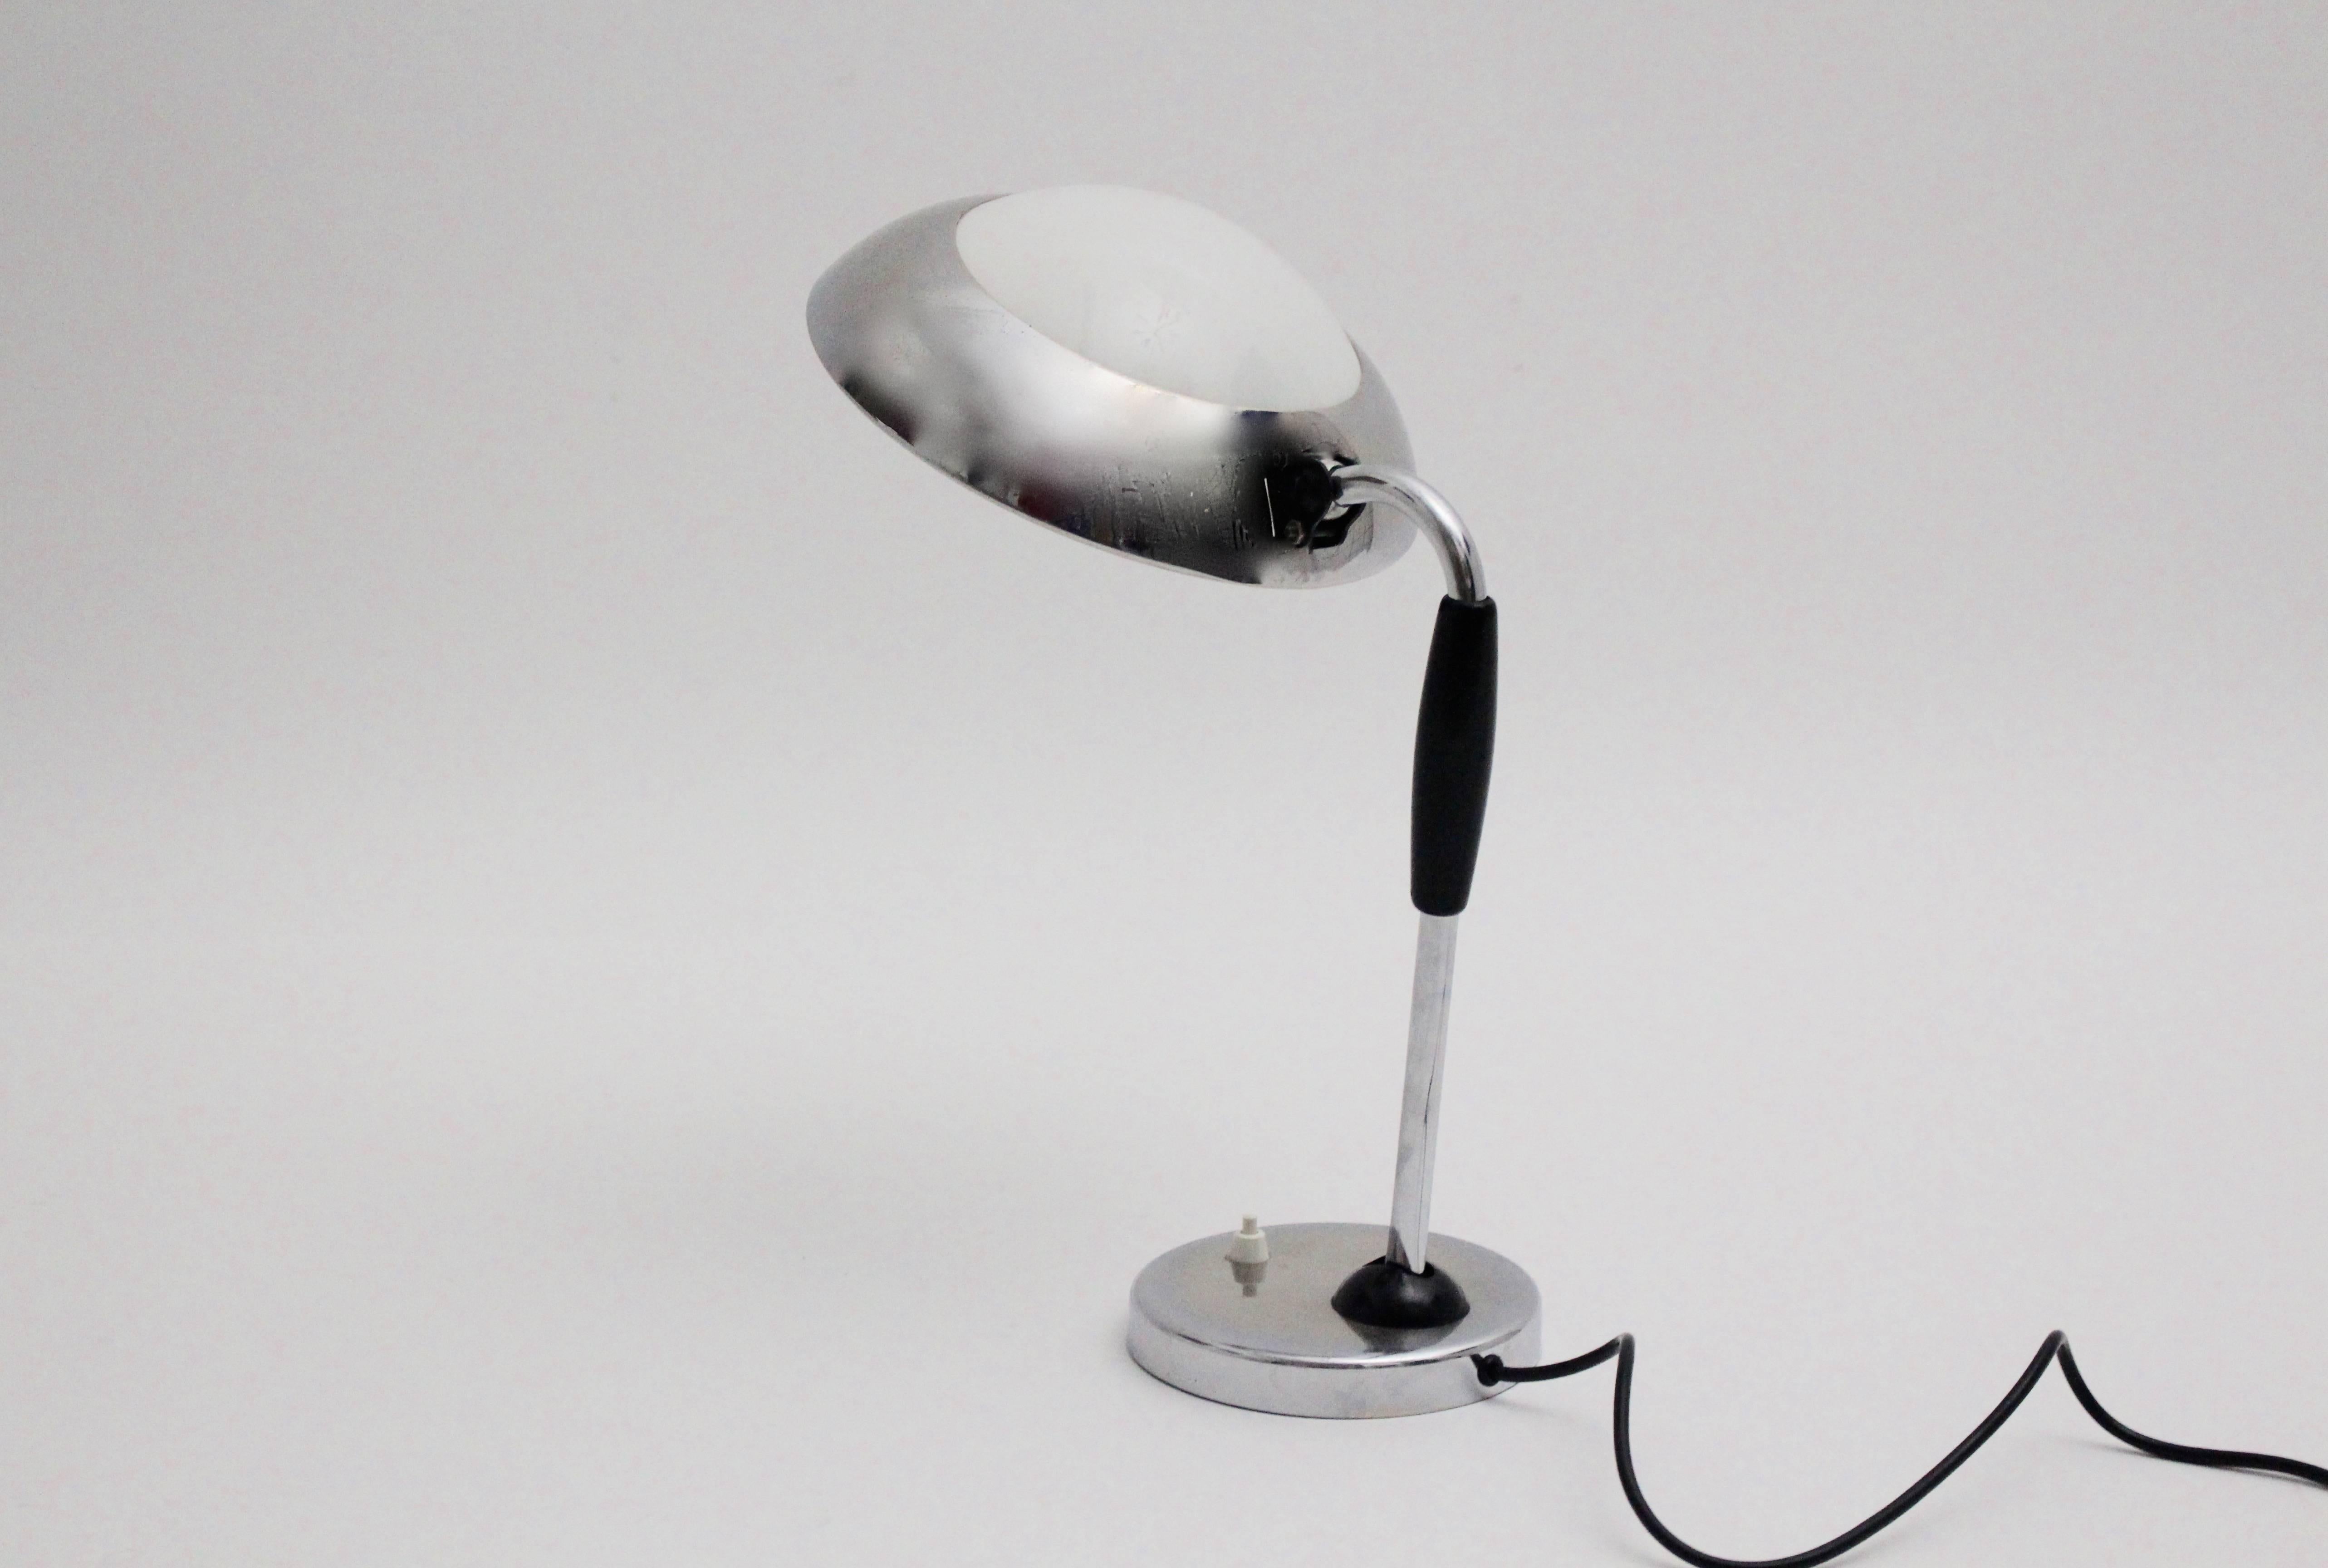 Bauhaus Vintage Metal Desk Lamp Attributed to Christian Dell 1930s Germany In Good Condition For Sale In Vienna, AT